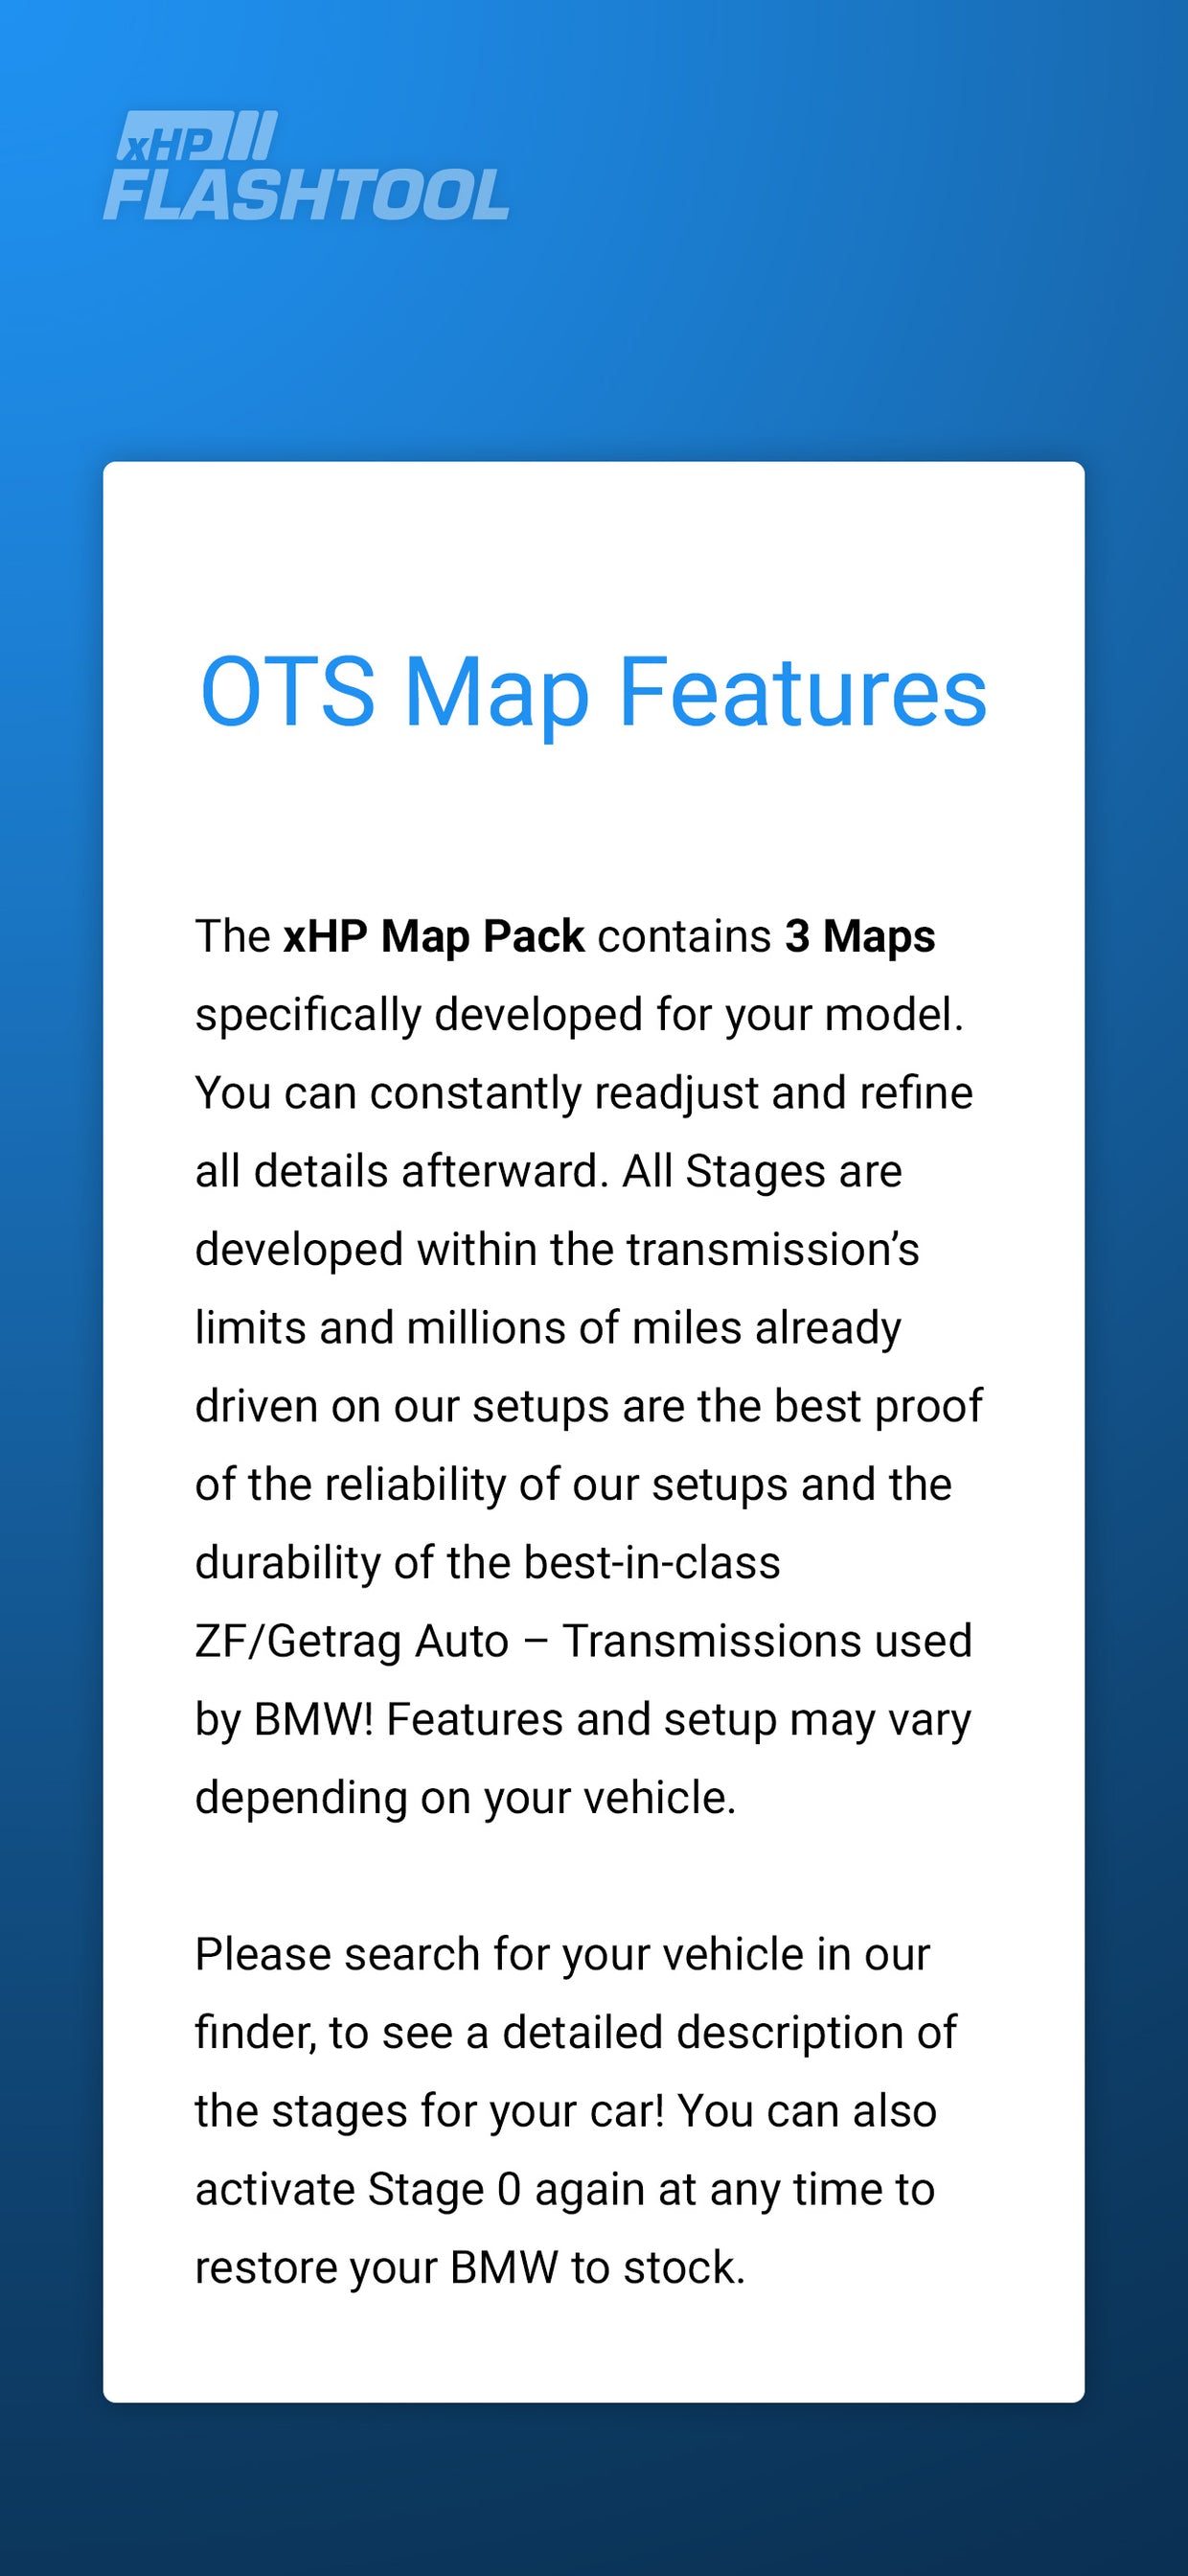 Screen of the xHP Flashtool App, showing the OTS Map Stage feature description